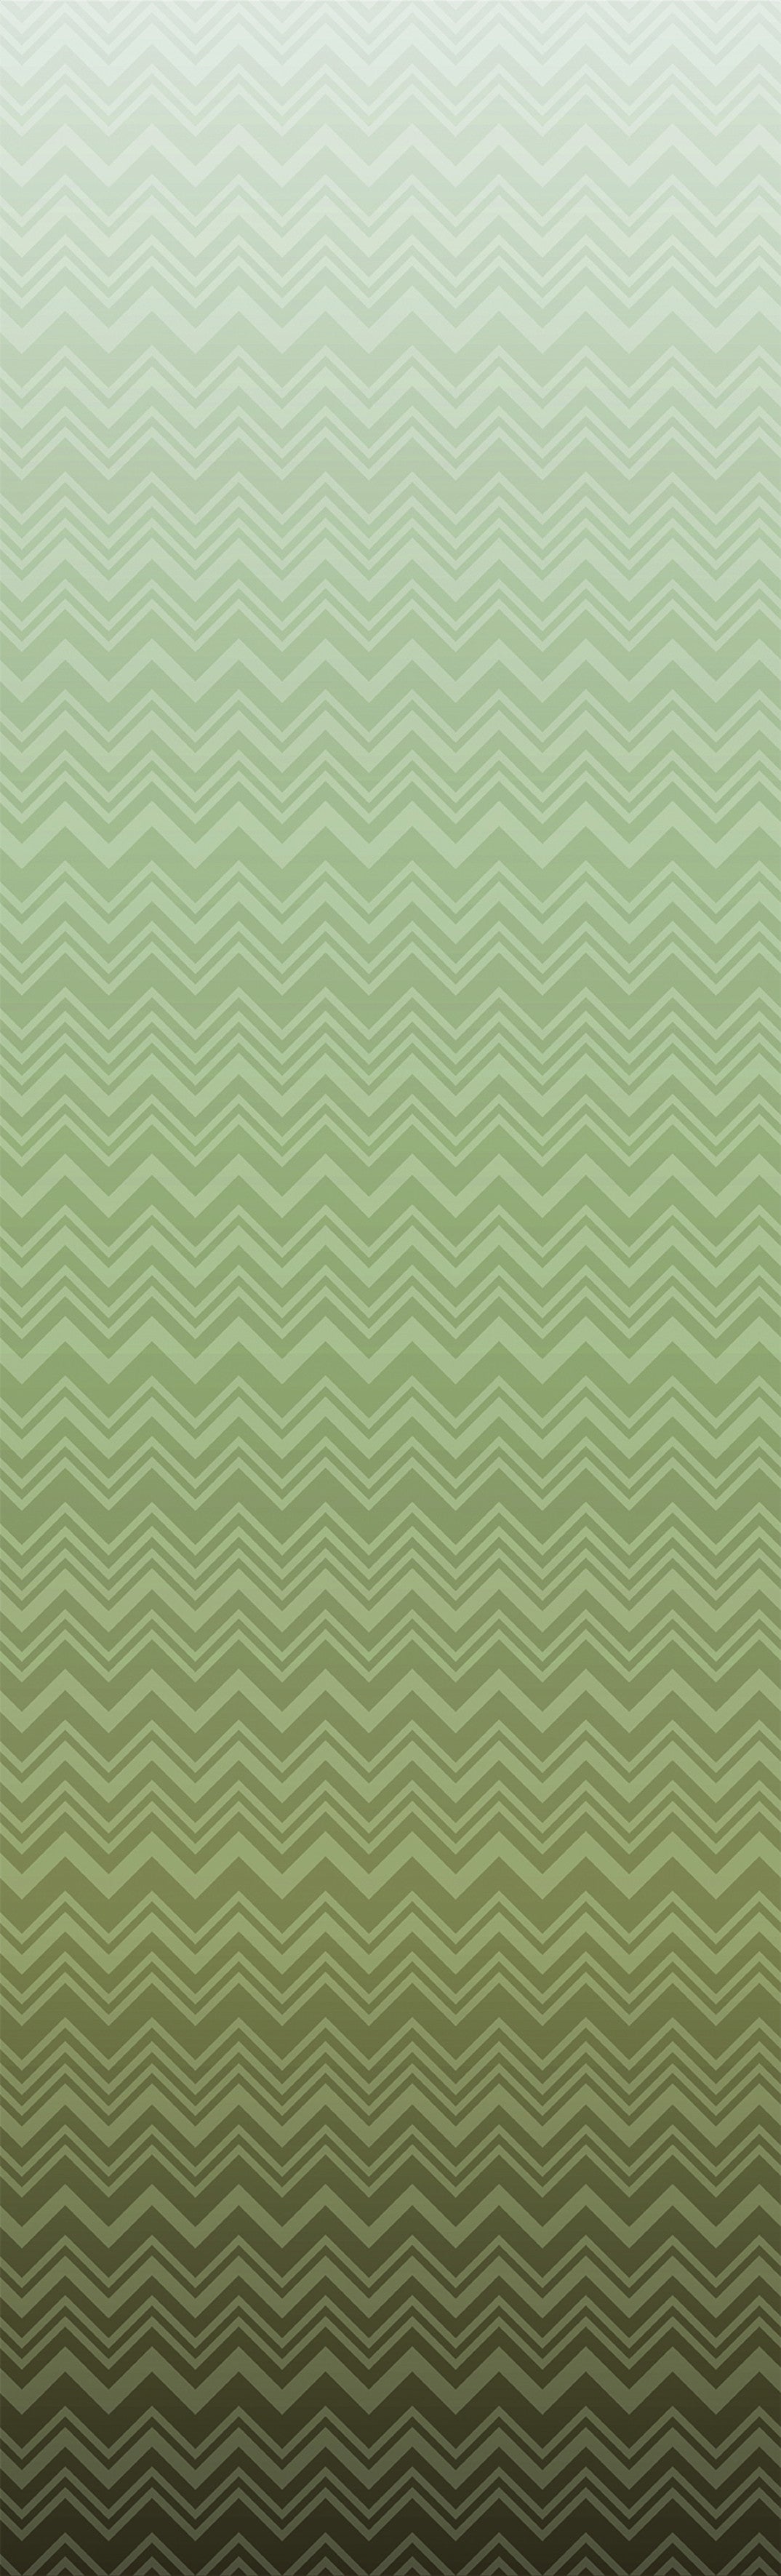 Missoni Home Wallcoverings 04 Iconic Shades 10392